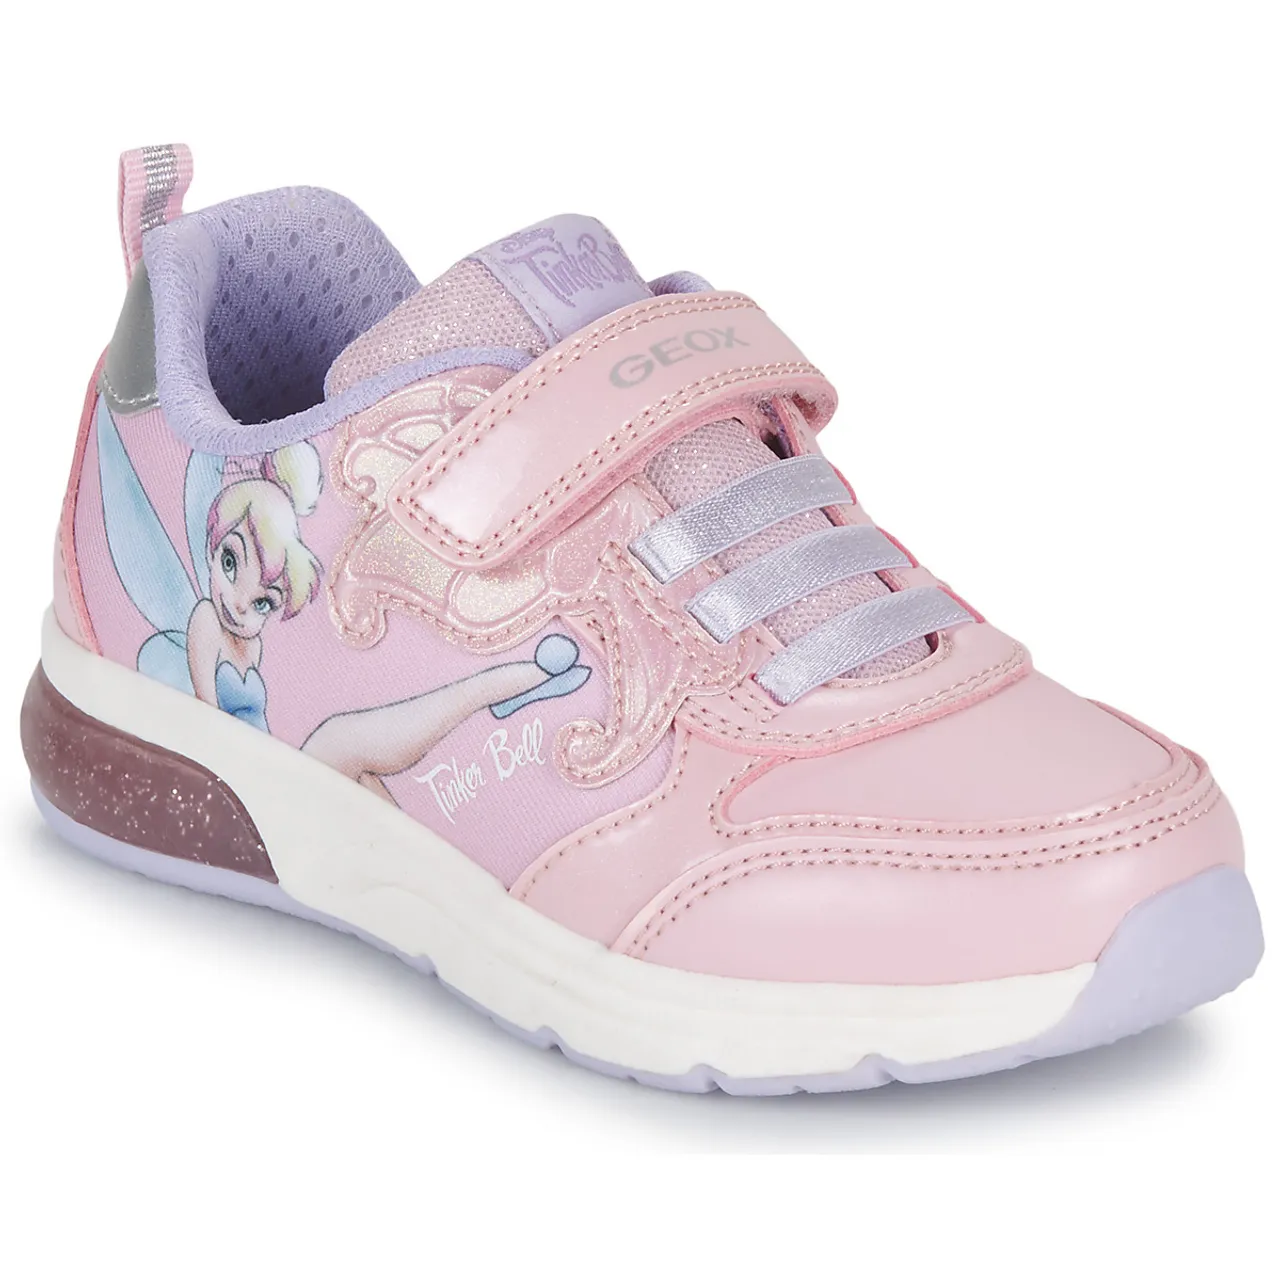 Geox  J SPACECLUB GIRL C  girls's Children's Shoes (Trainers) in Pink